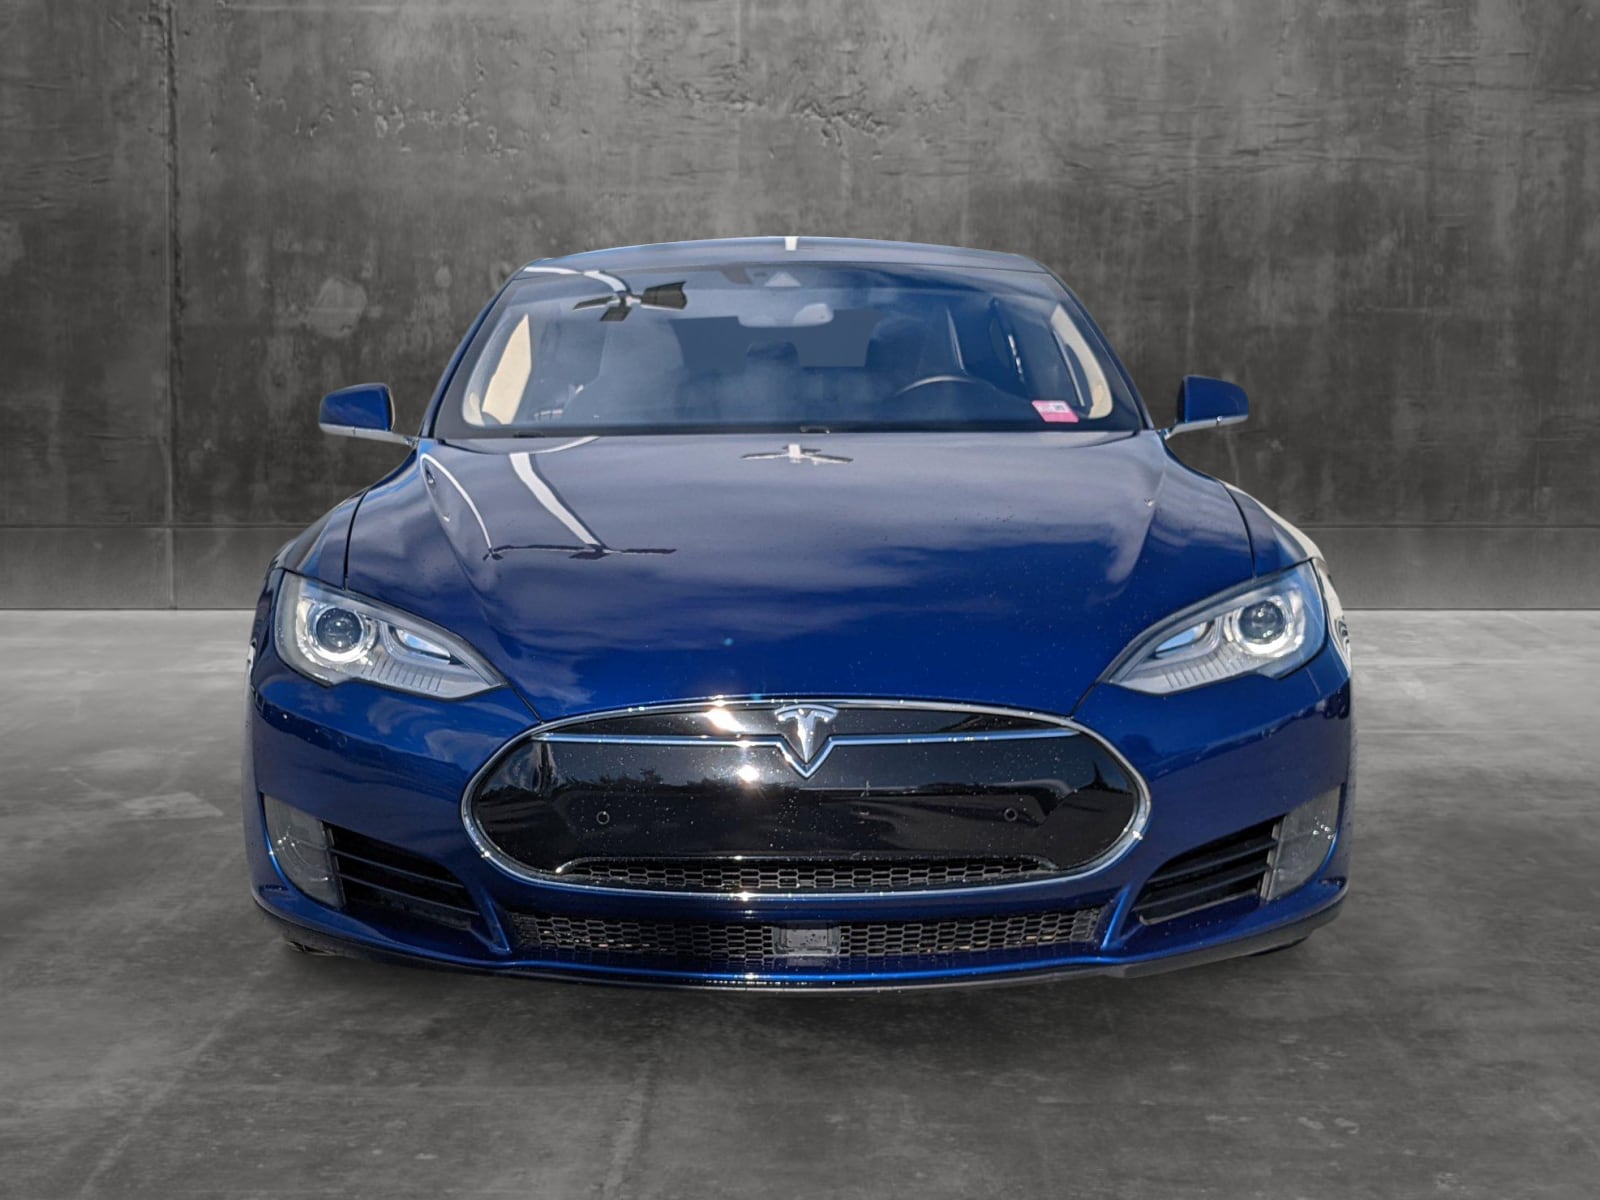 Used 2015 Tesla Model S 85D with VIN 5YJSA1E28FF120001 for sale in Mountain View, CA